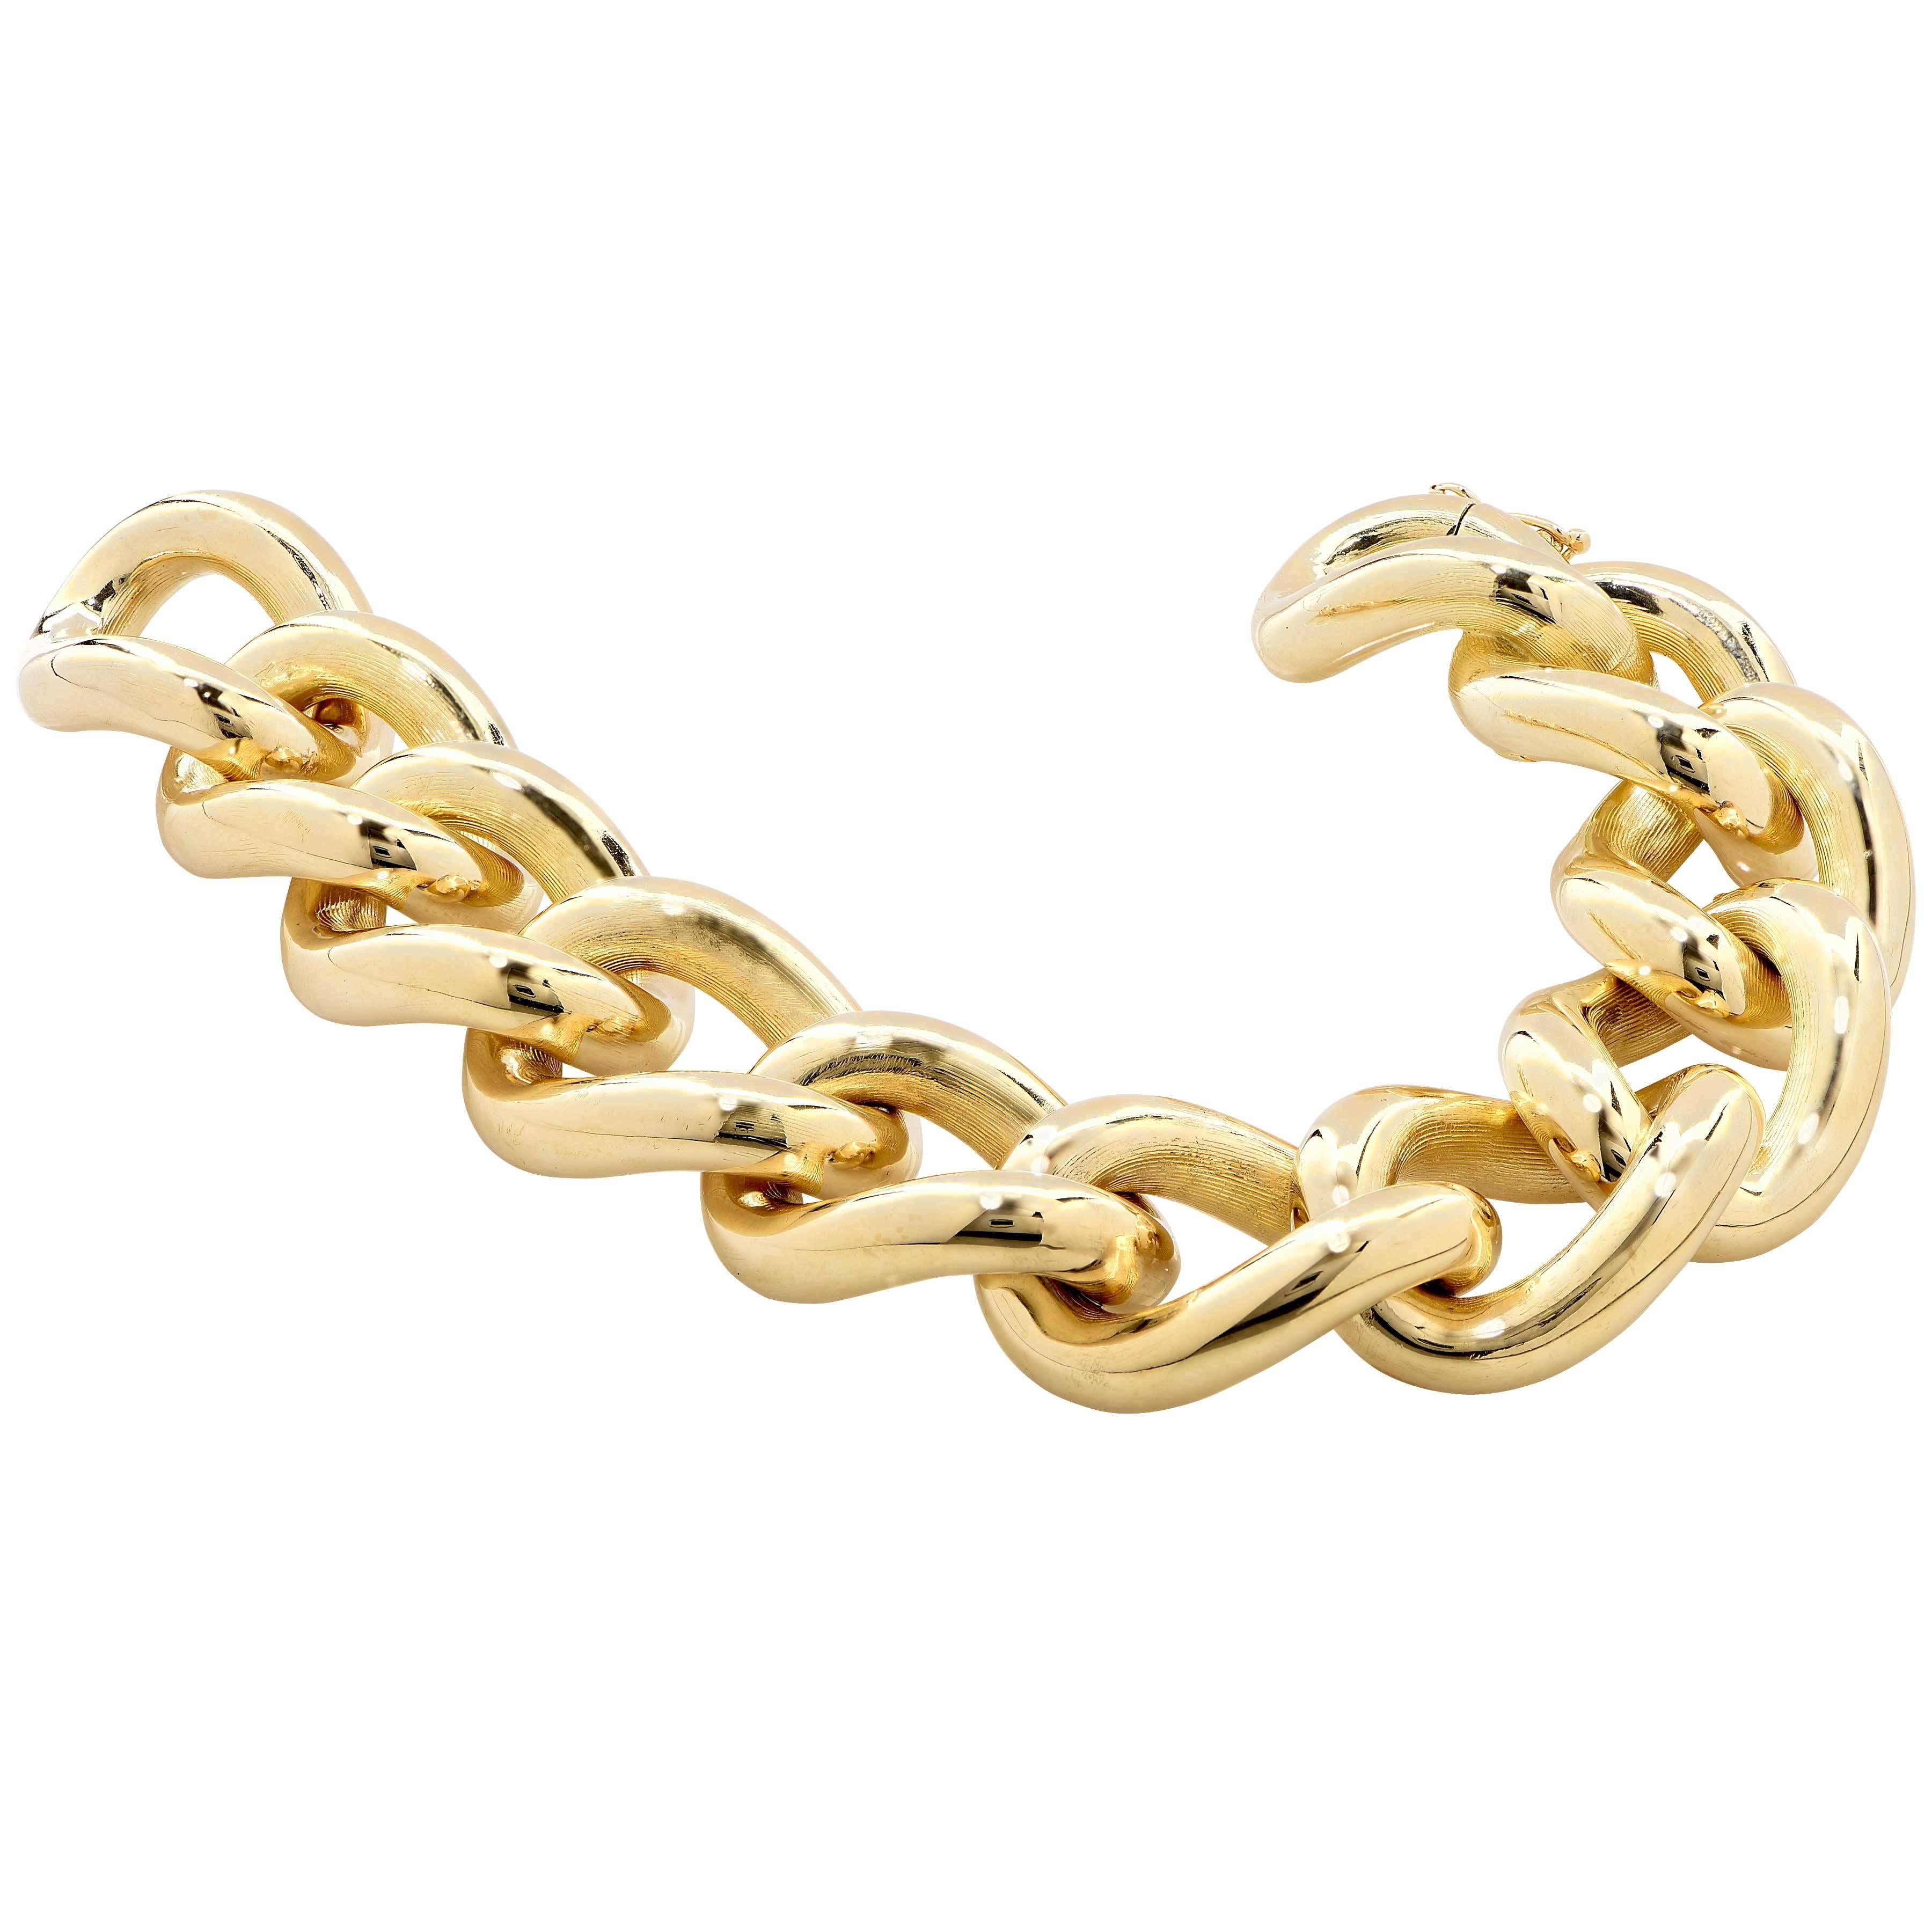 18 Karat Yellow Gold Retro Design Highly flexible gold link bracelet.
Length 7 1/2 inches 
Weight 53.3 grams.
Metal Type: 18 Kt Yellow Gold
